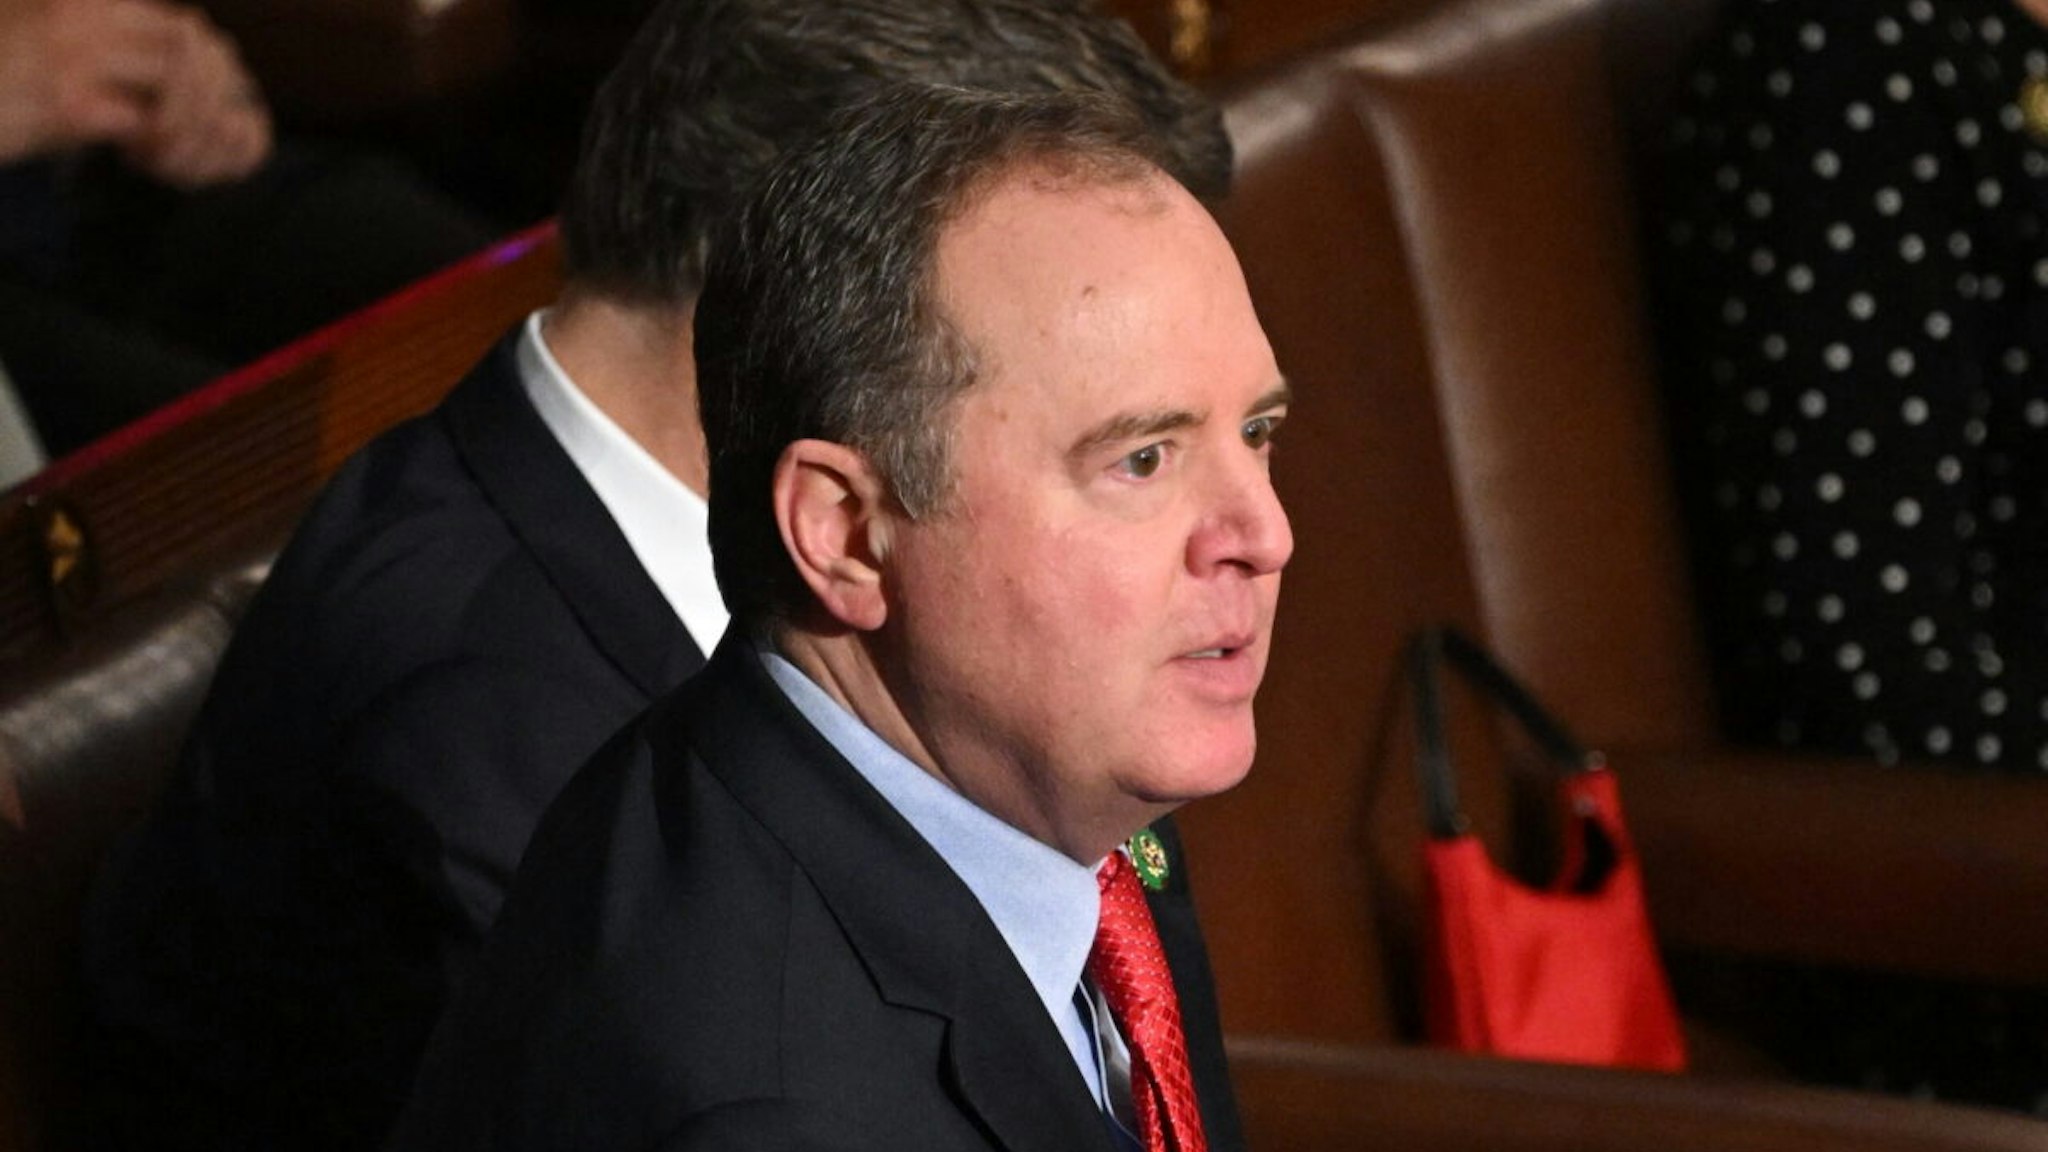 US Representative Adam Schiff, Democrat of California, watches as the US House of Representatives convenes for the 118th Congress and conducts a second vote for Speaker of the House, at the US Capitol in Washington, DC, January 3, 2023.